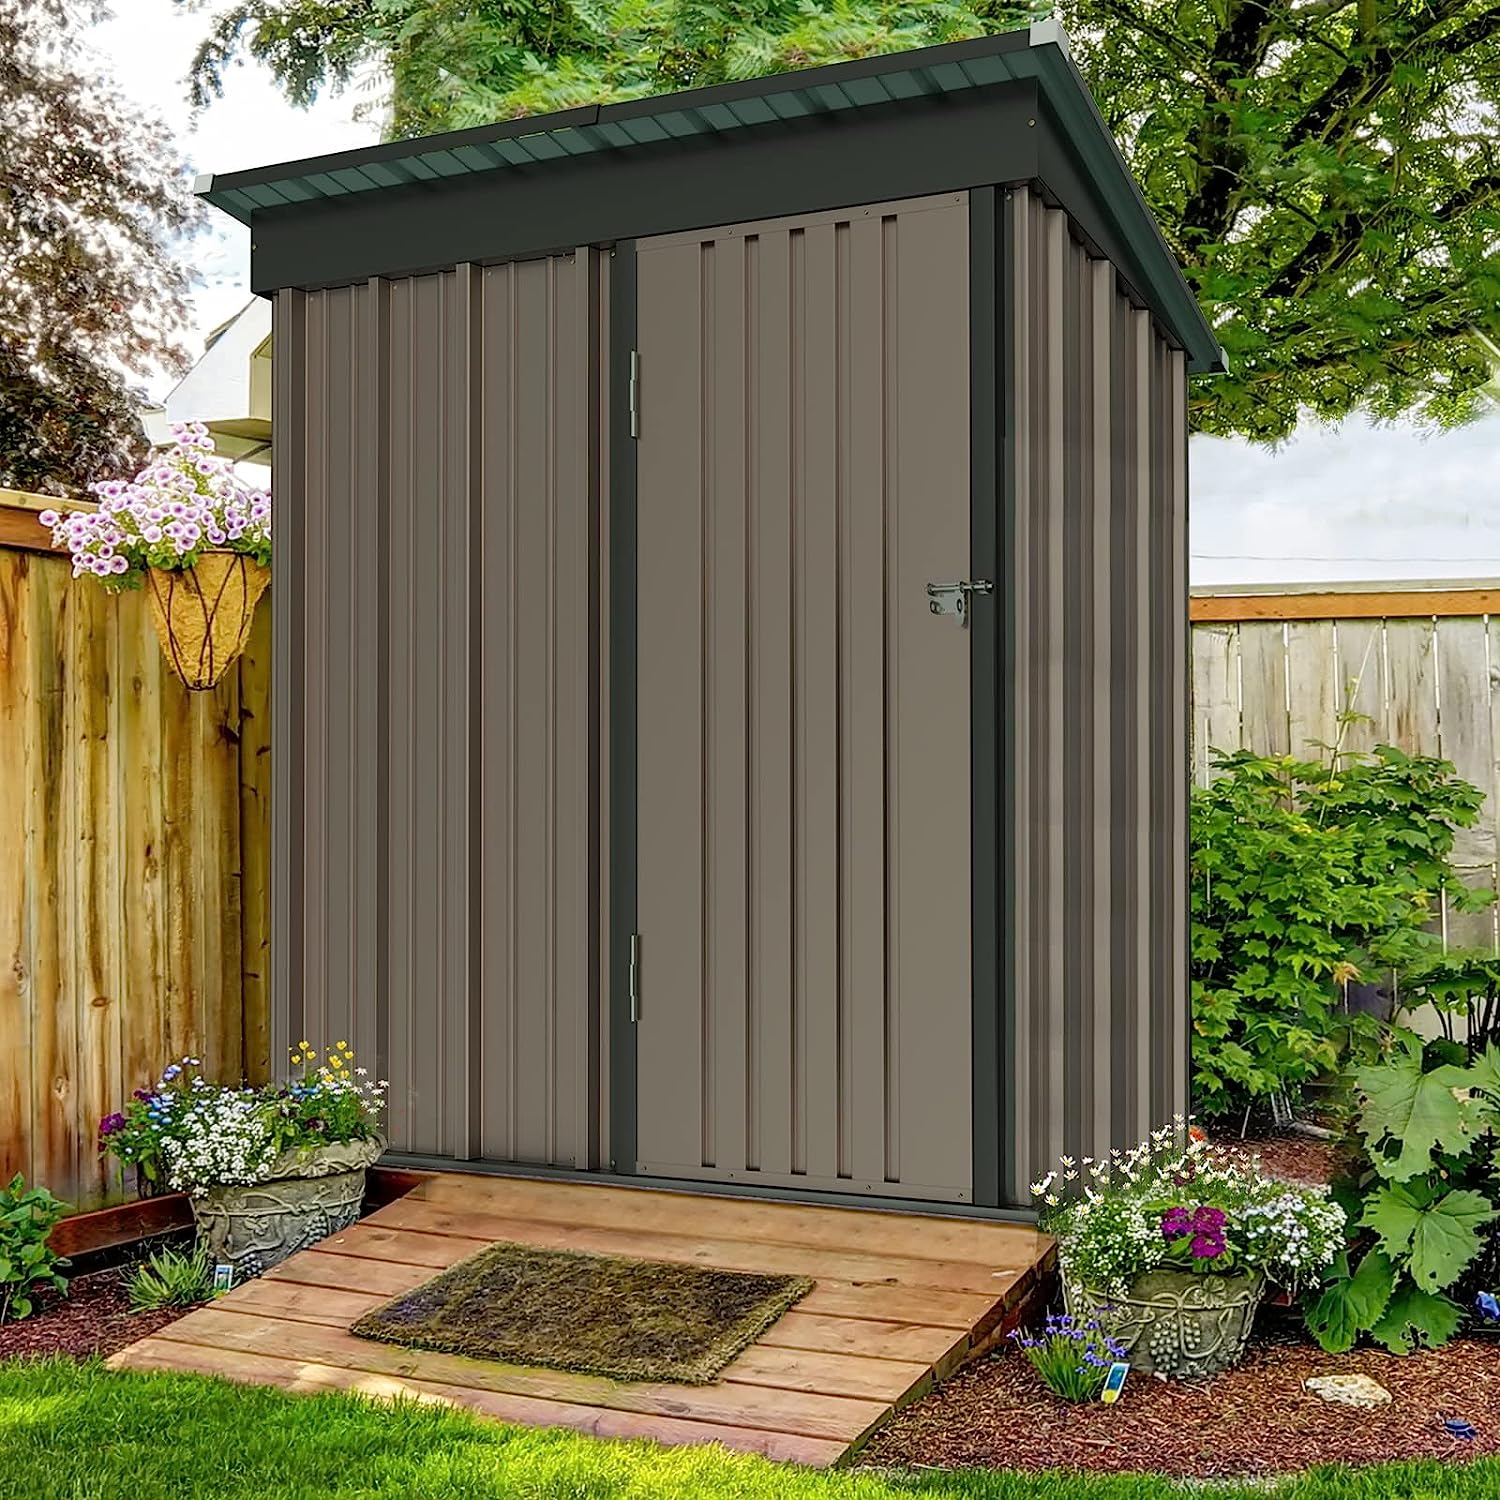 UDPATIO Outdoor Storage Shed 5x3 FT, Metal Garden Shed [...]